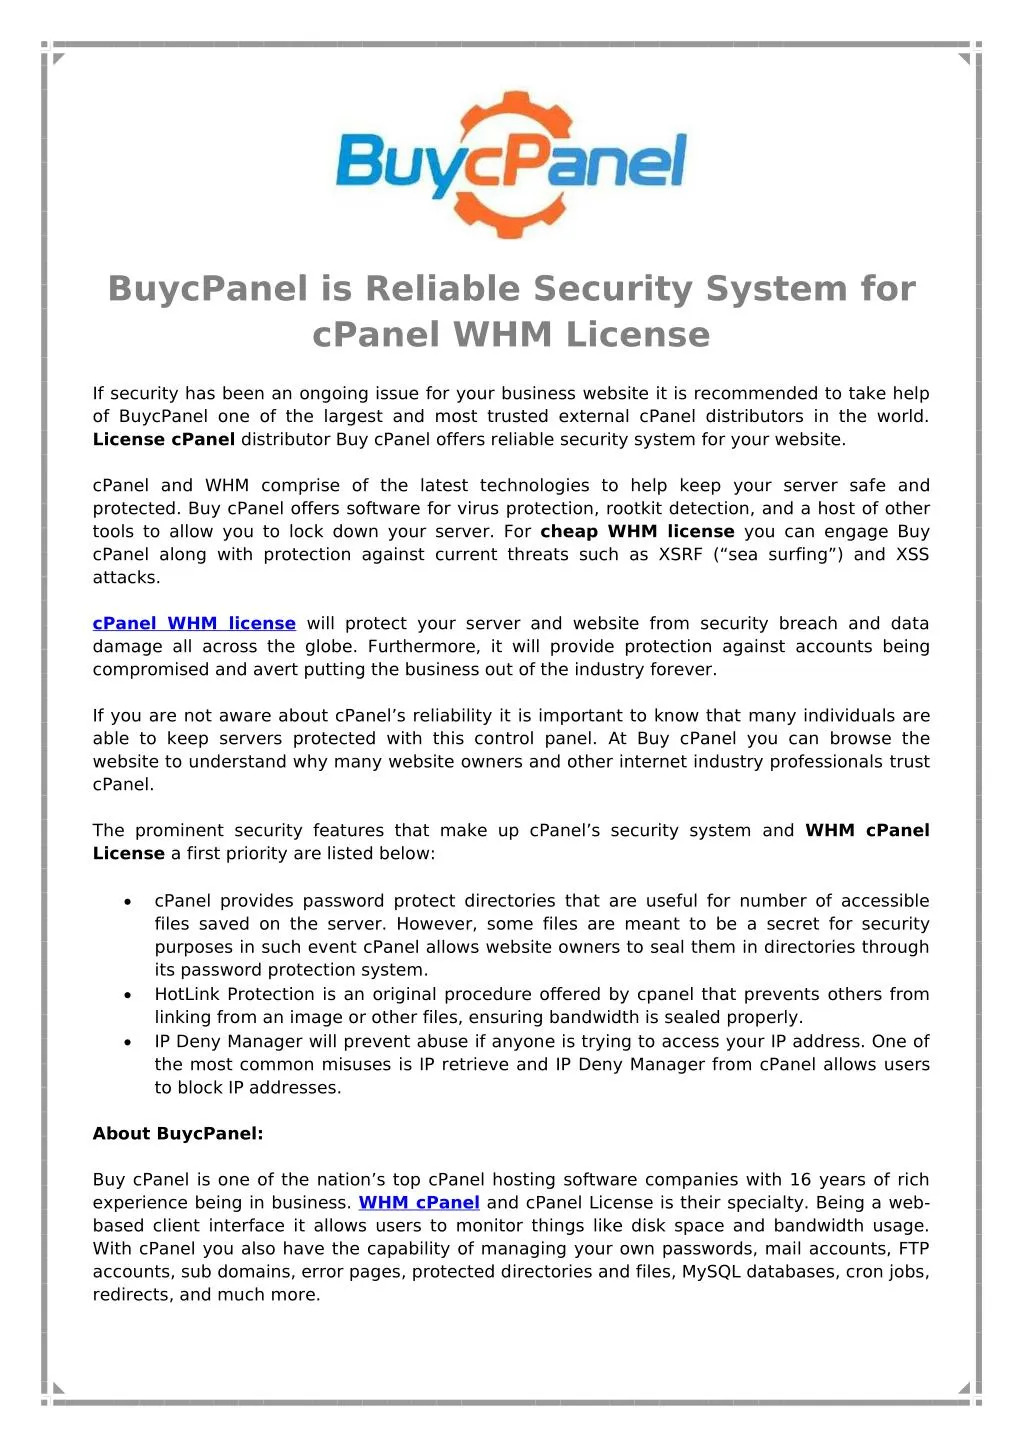 buycpanel is reliable security system for cpanel